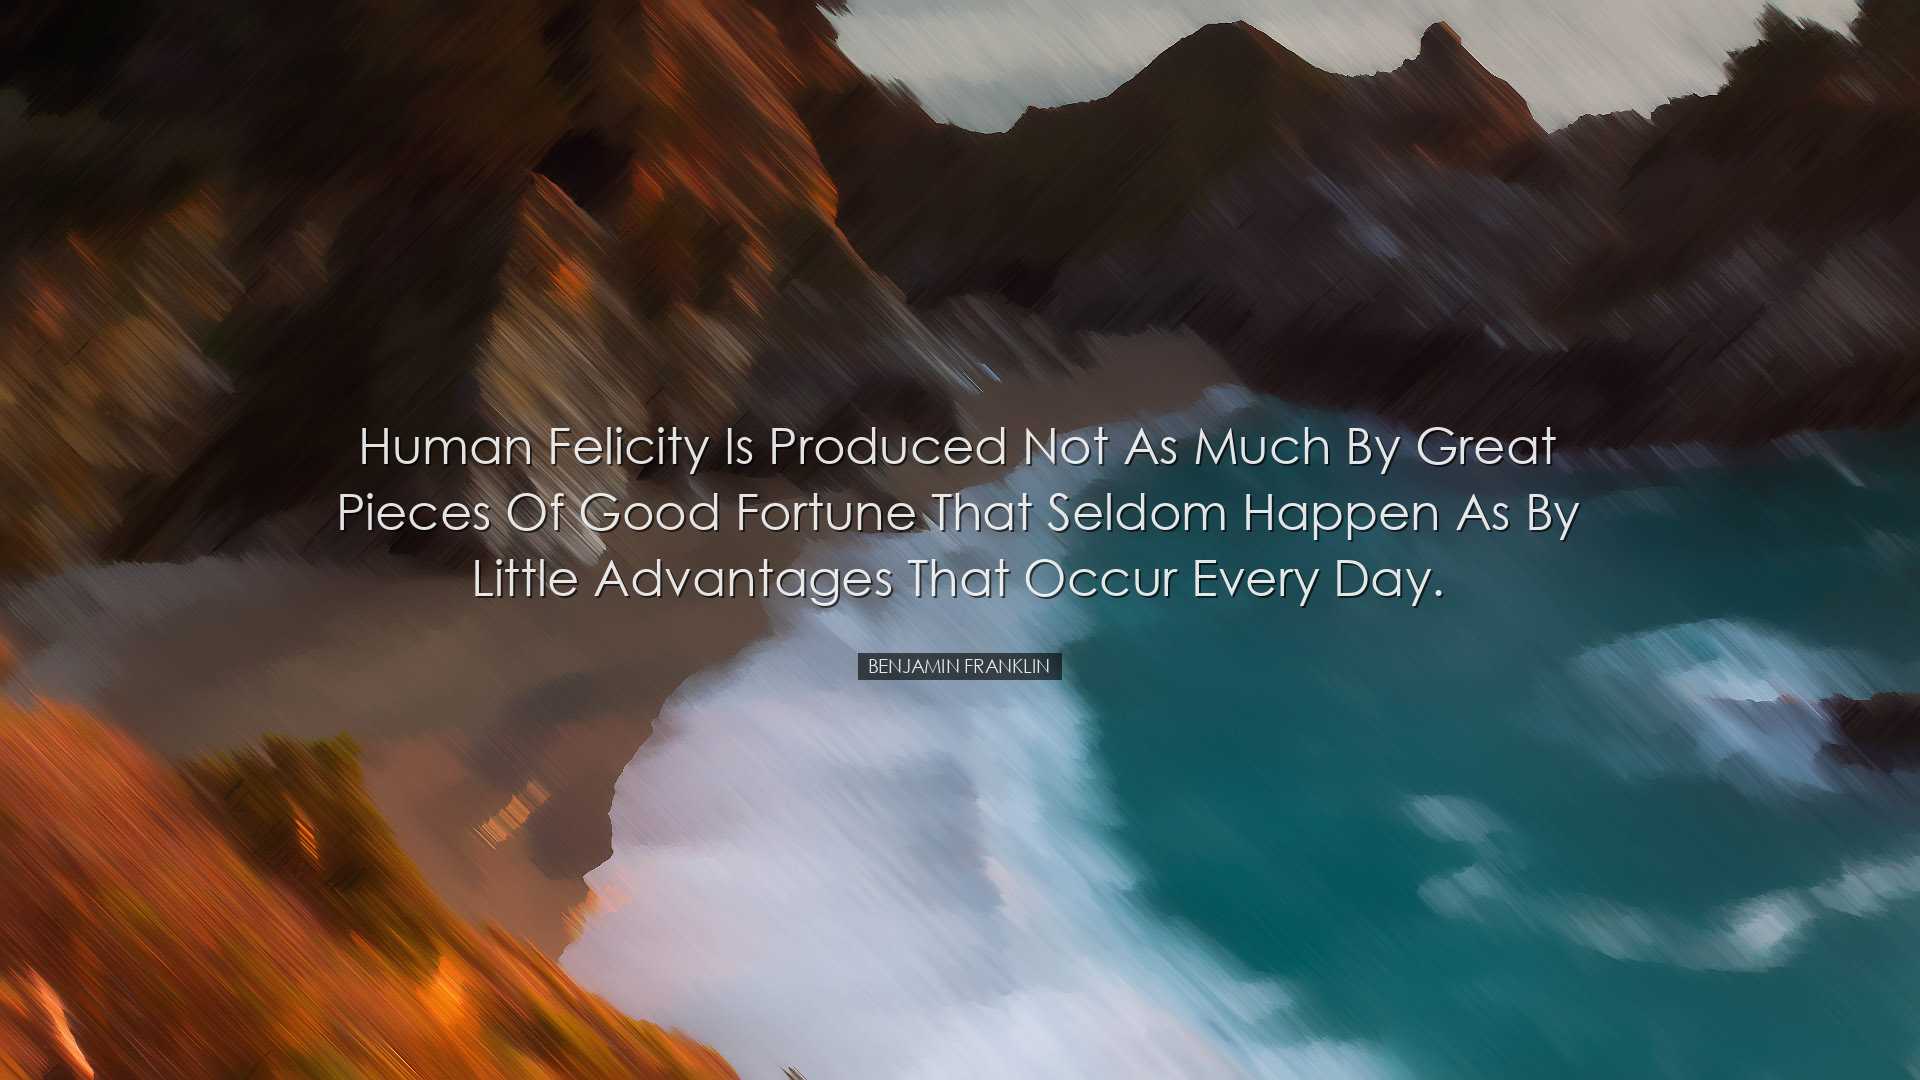 Human felicity is produced not as much by great pieces of good for